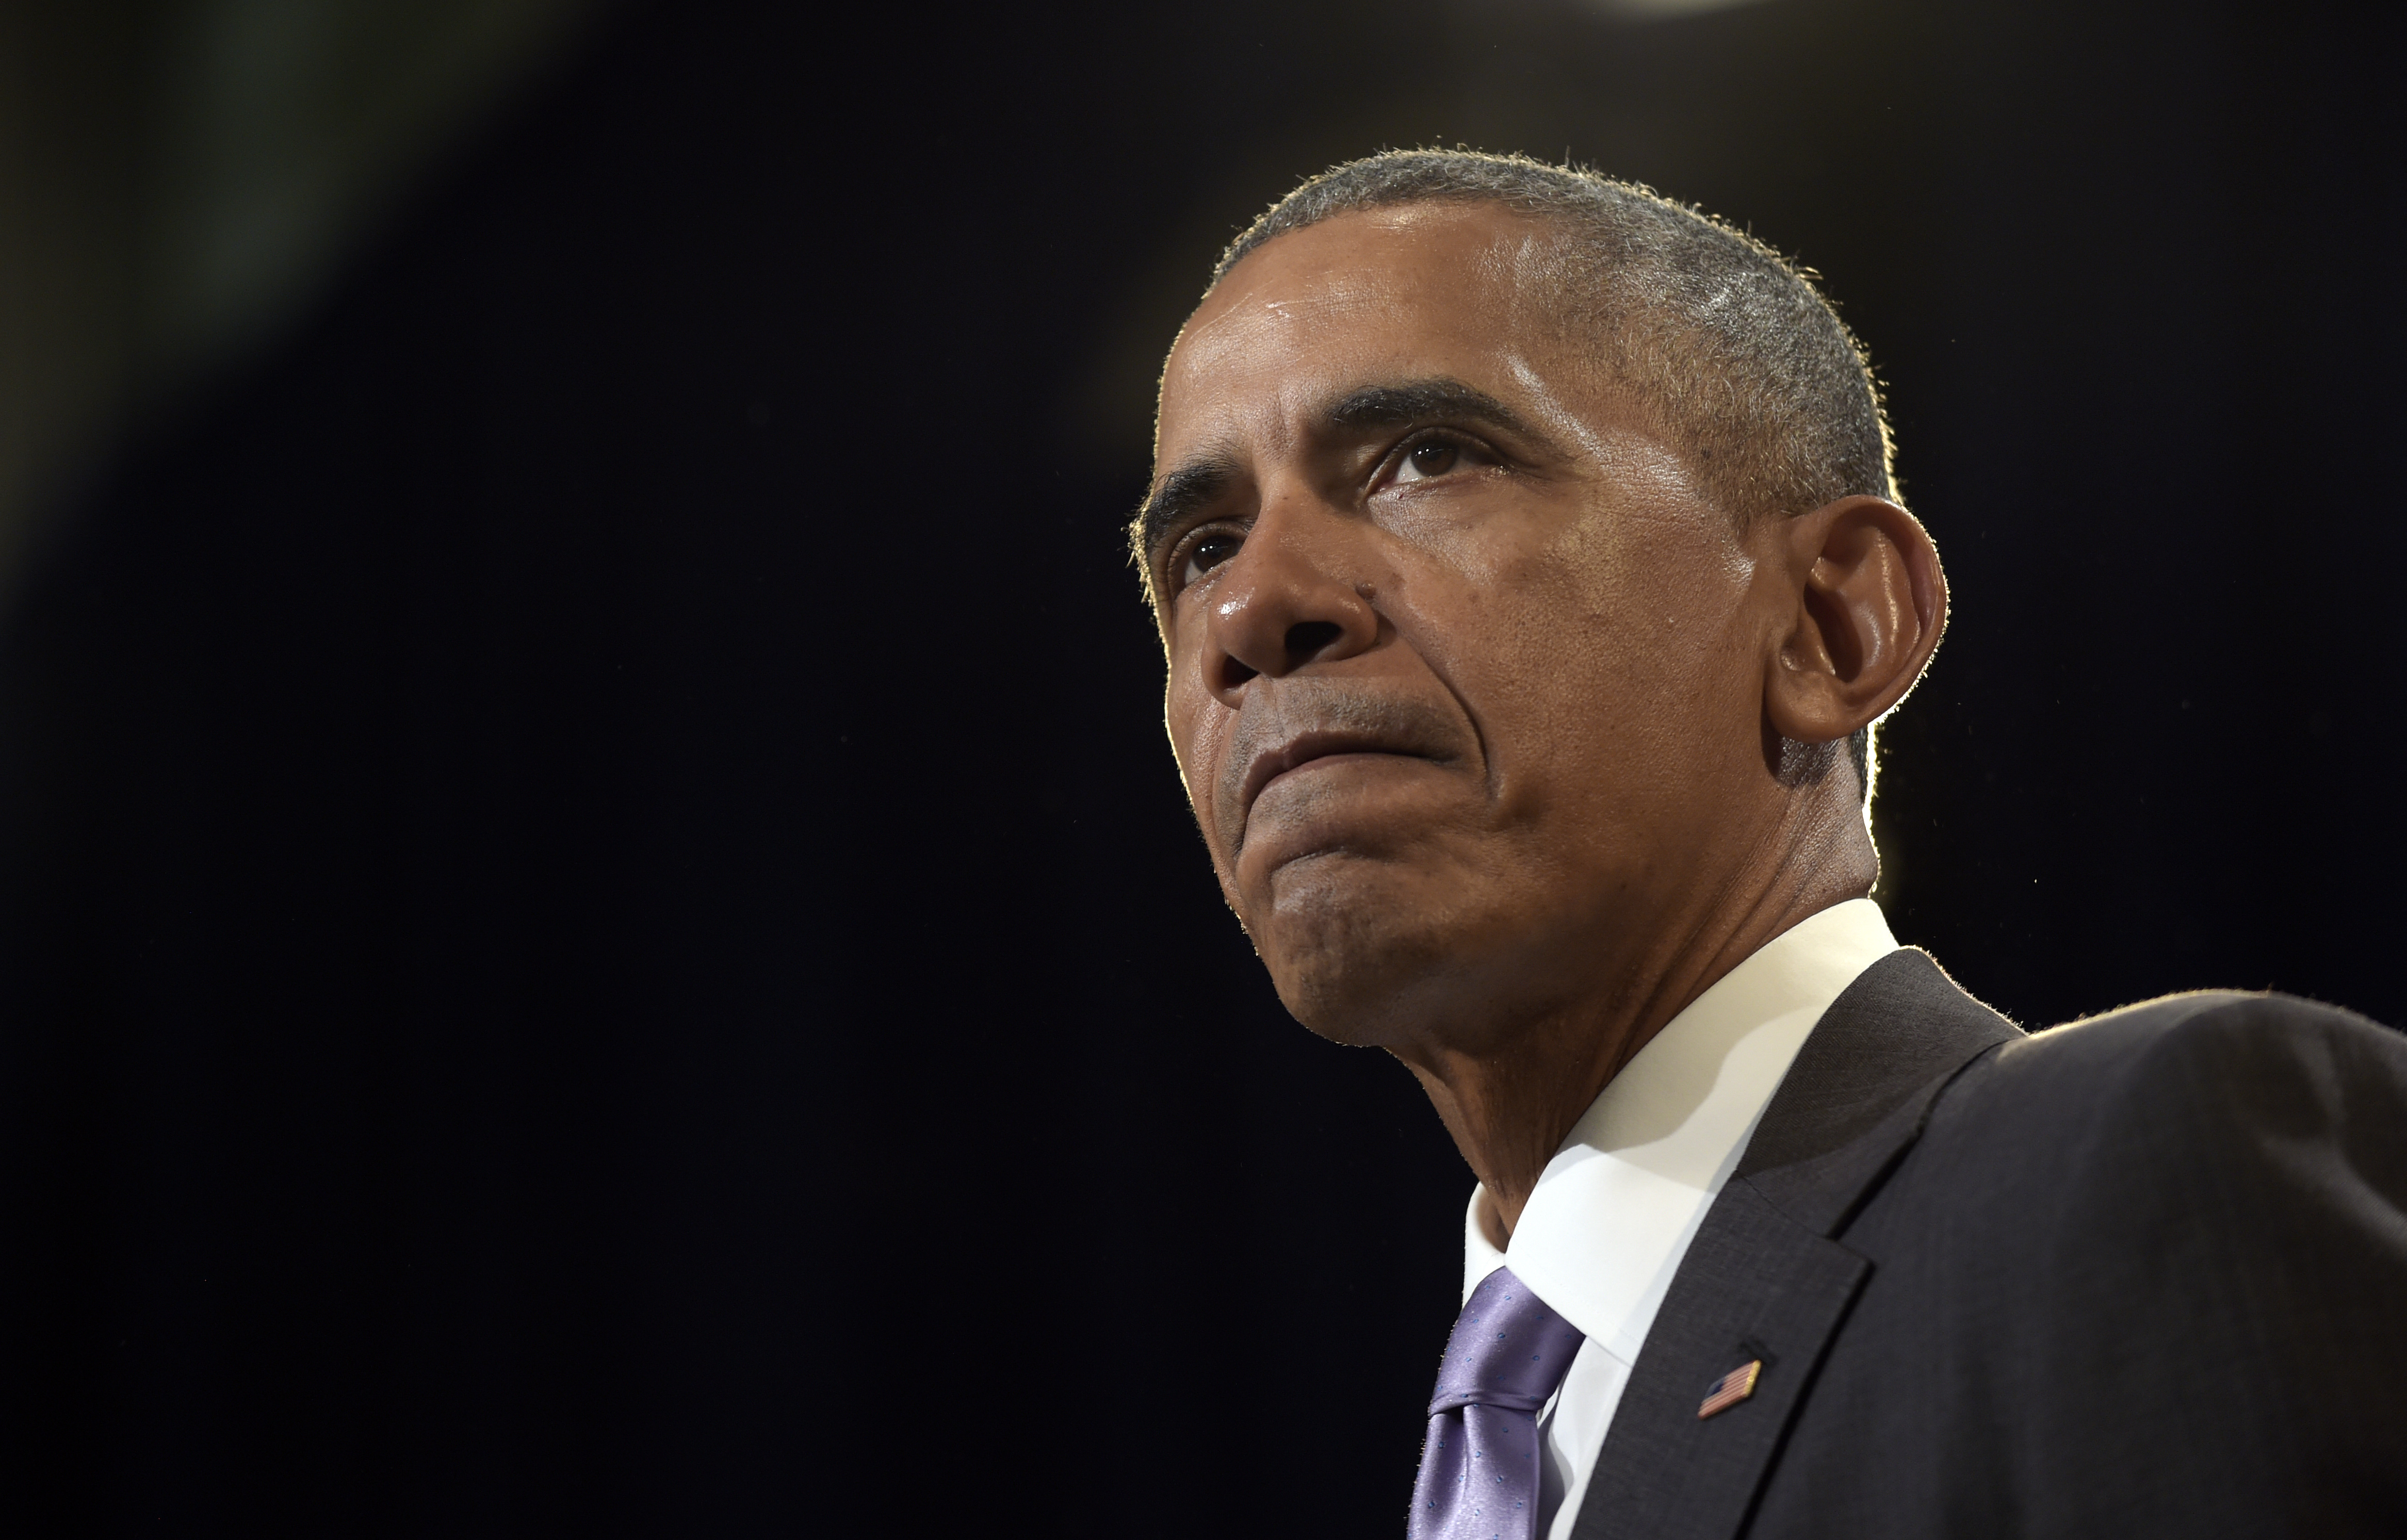 Obama says Obamacare is working, yet needs fixes